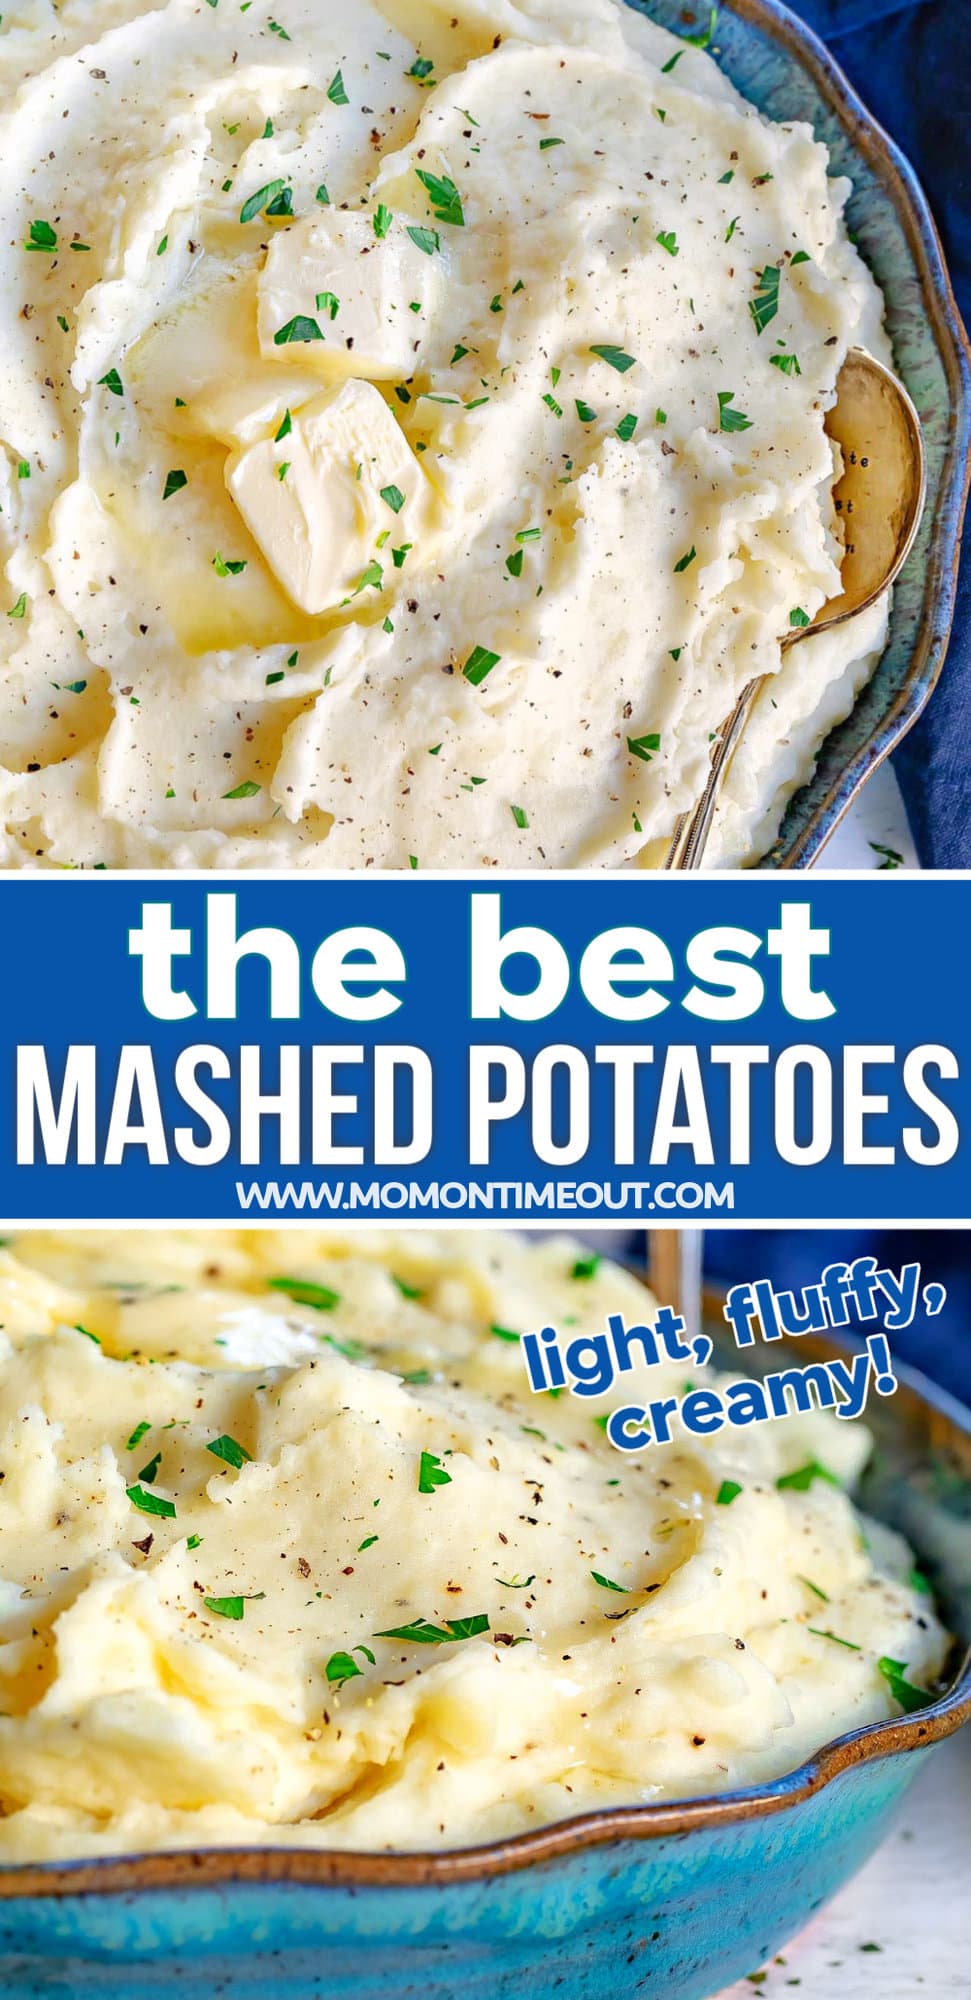 The BEST Mashed Potatoes Recipe - Mom On Timeout